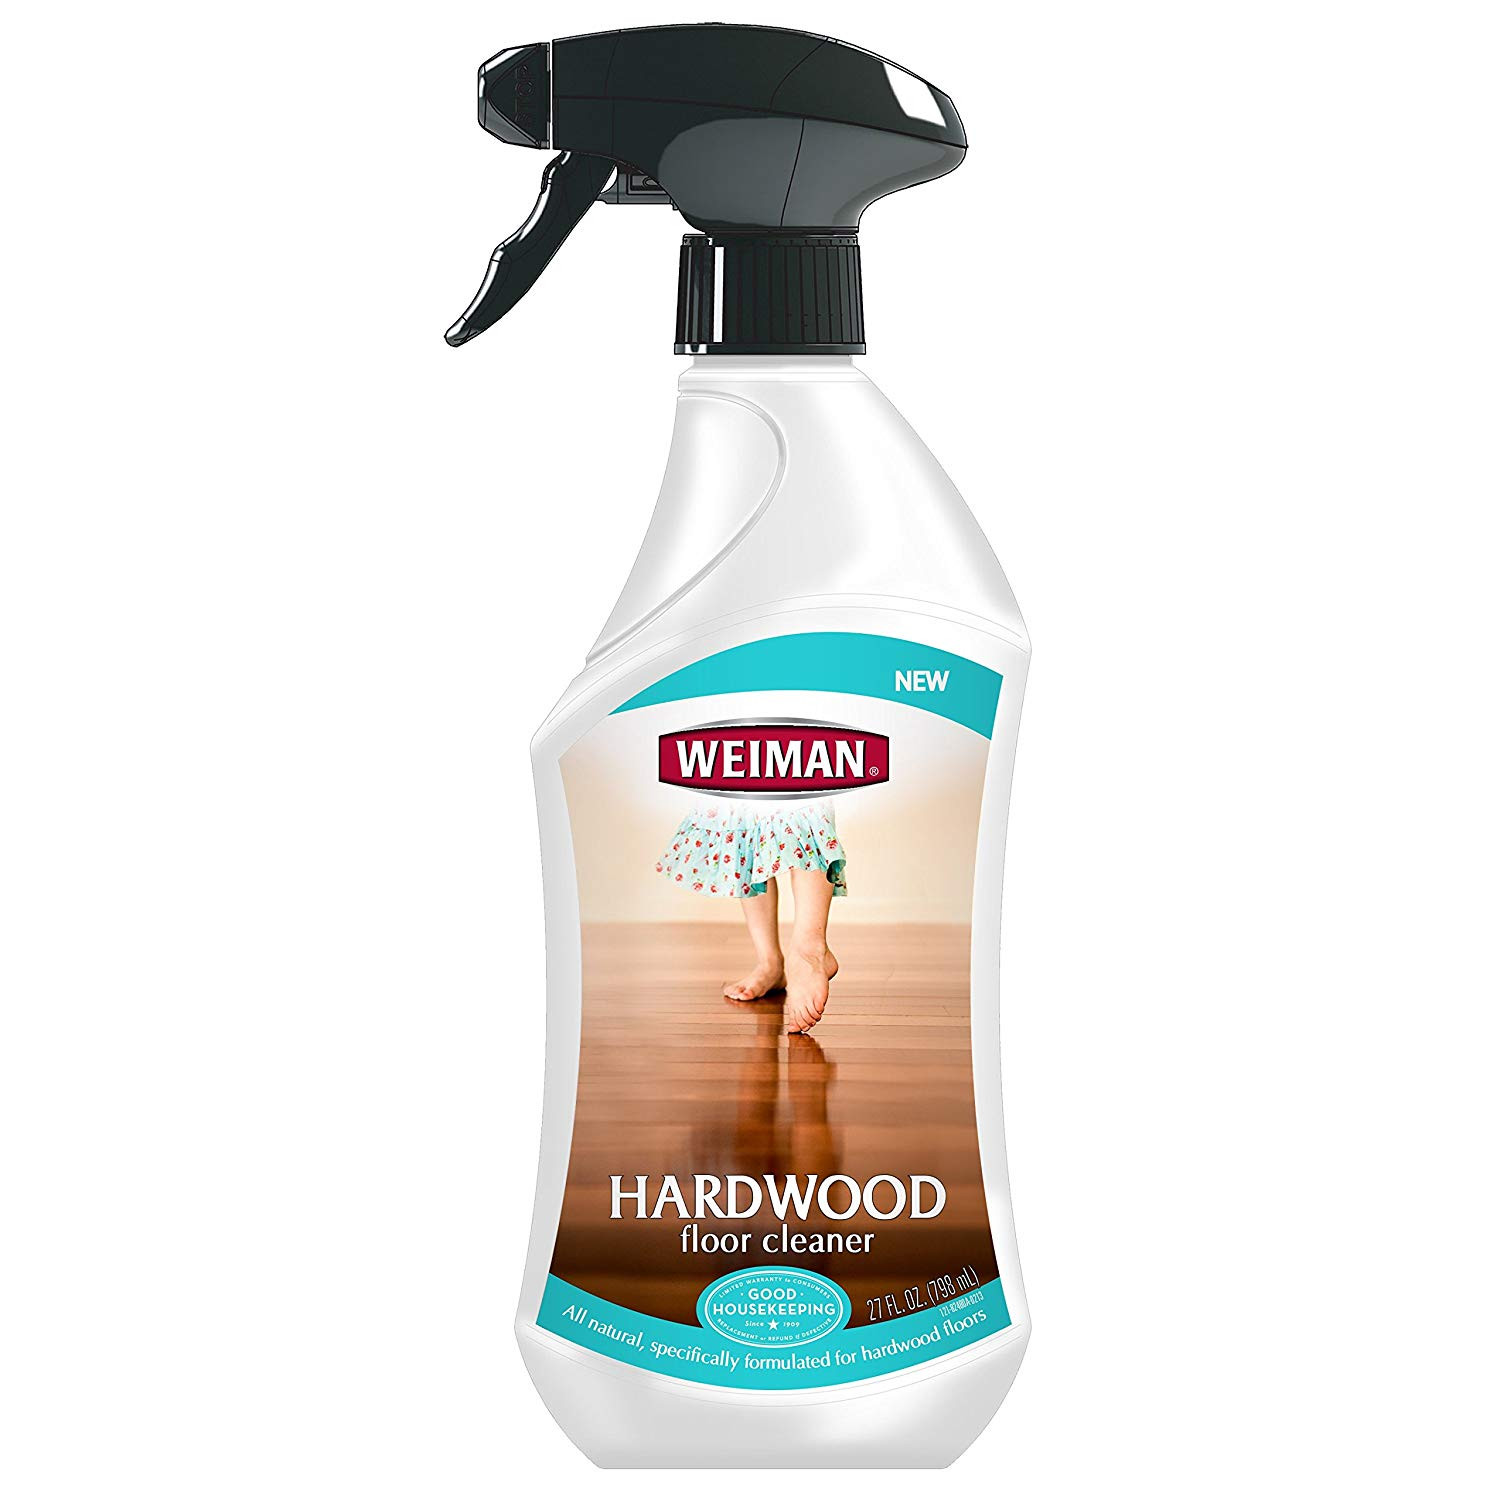 22 Unique Cleaning Engineered Hardwood Floors with Vinegar and Water 2024 free download cleaning engineered hardwood floors with vinegar and water of amazon com weiman hardwood floor cleaner surface safe no harsh with amazon com weiman hardwood floor cleaner surface safe no har